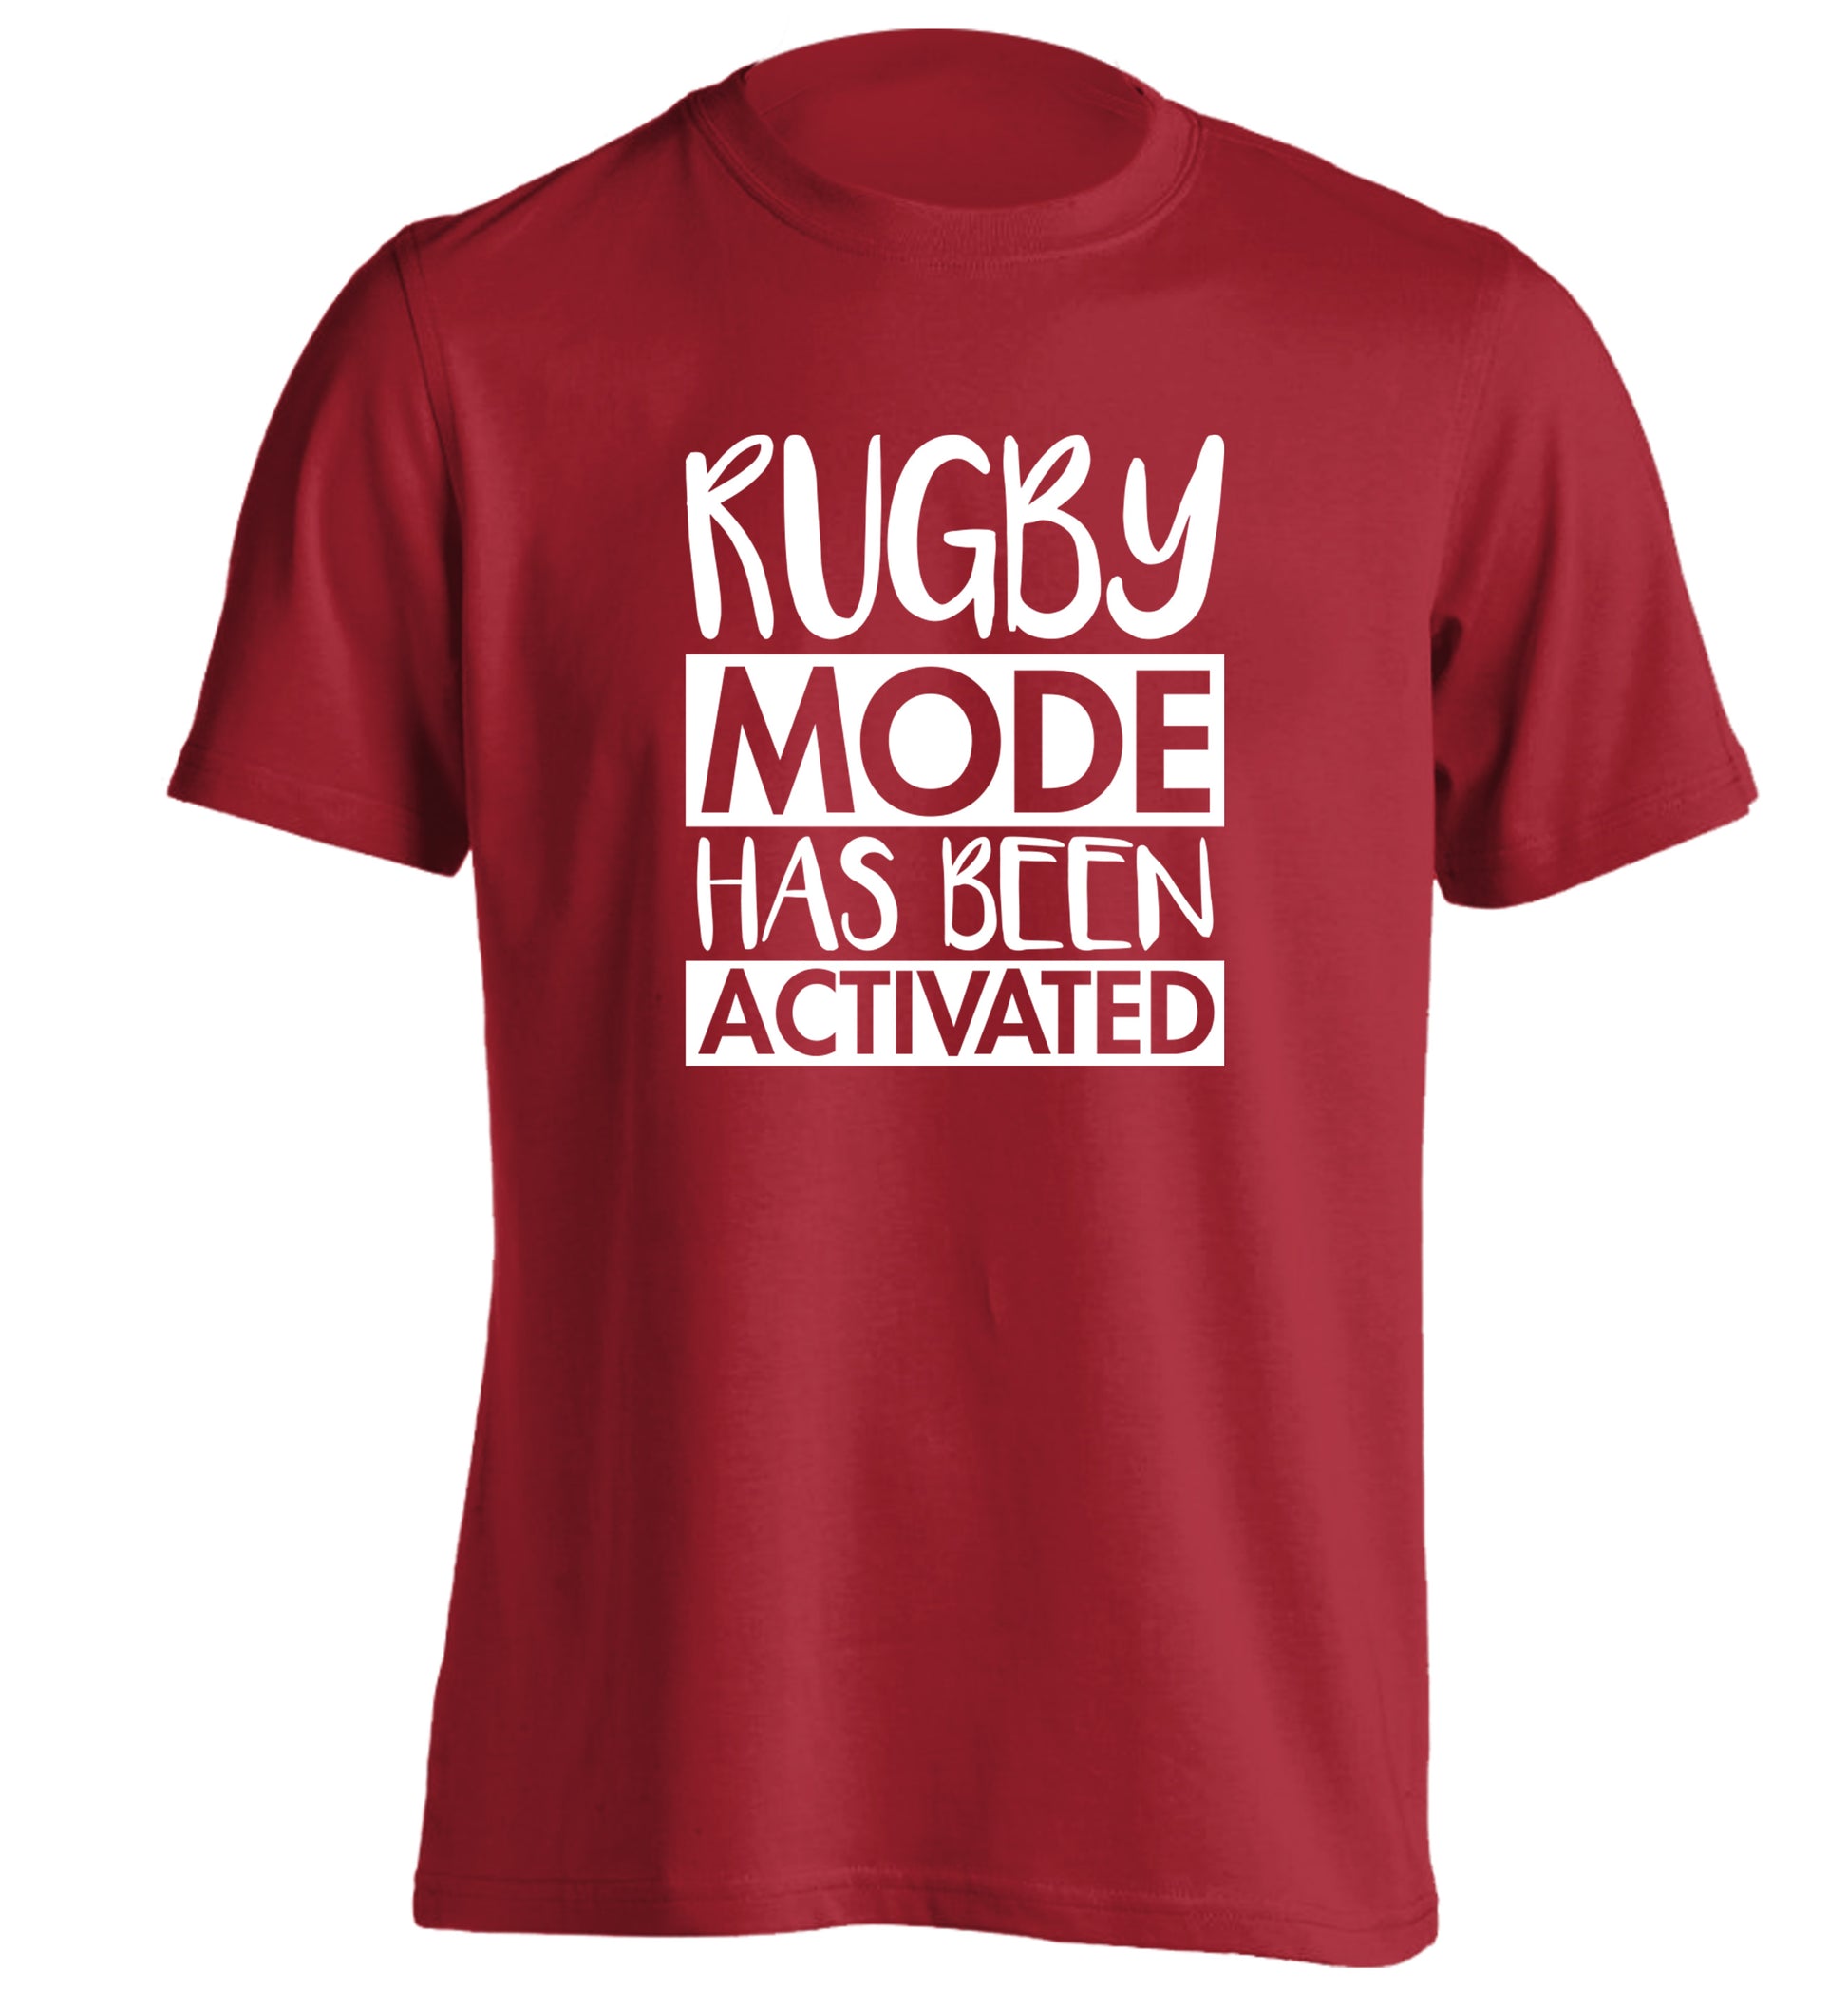 Rugby mode activated adults unisex red Tshirt 2XL